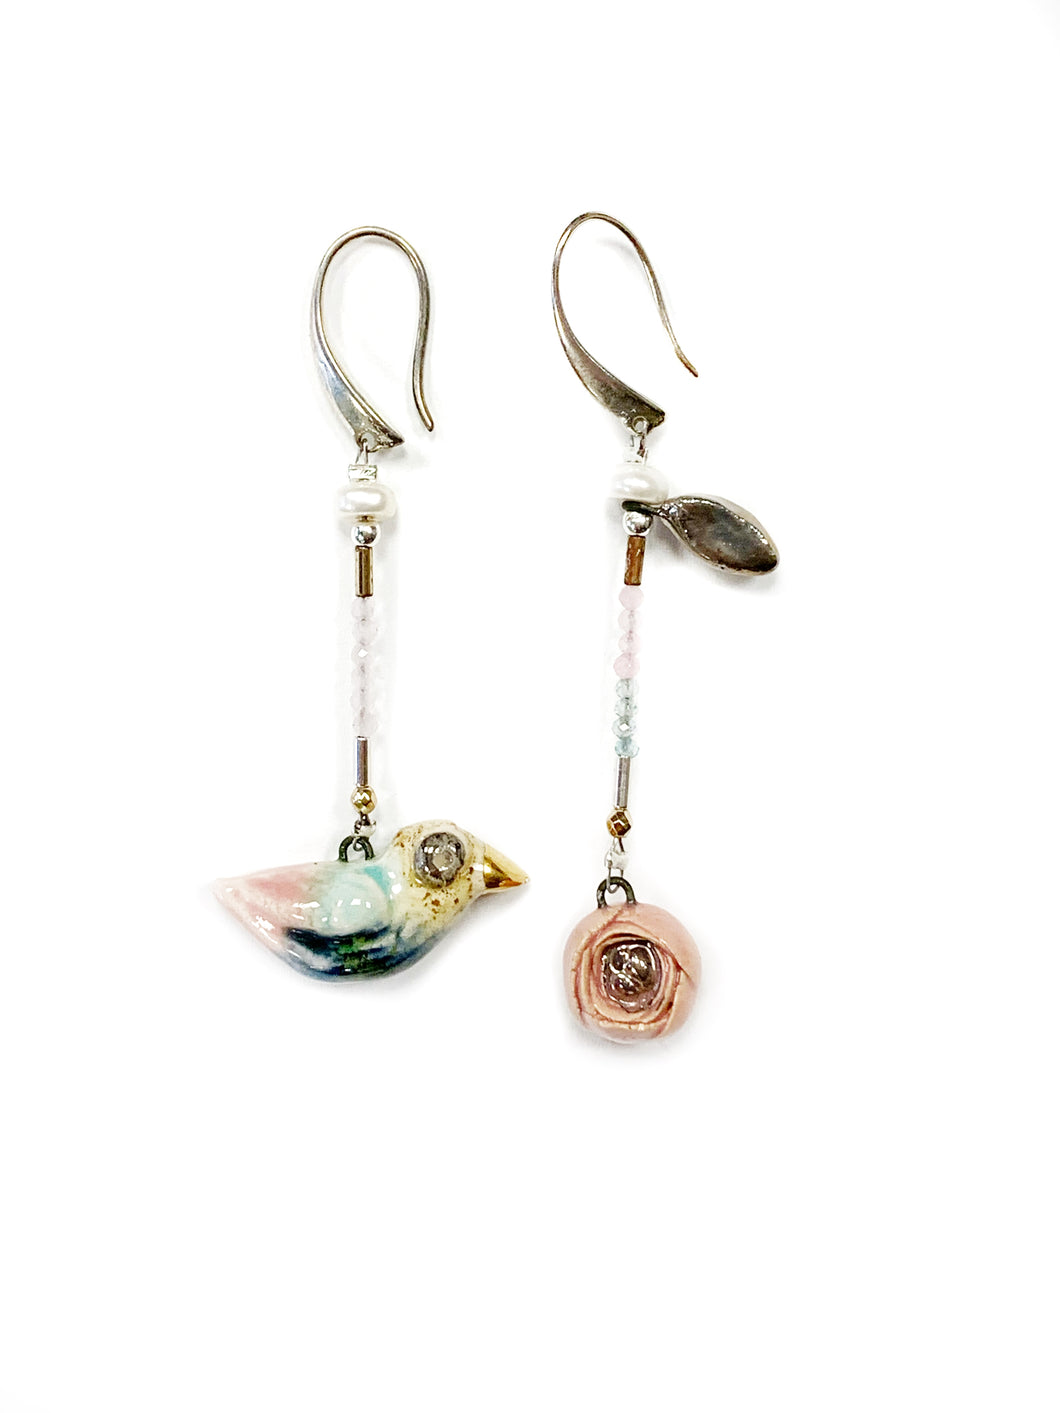 Ceramic mismatched earrings BIRD AND IRS ROSE